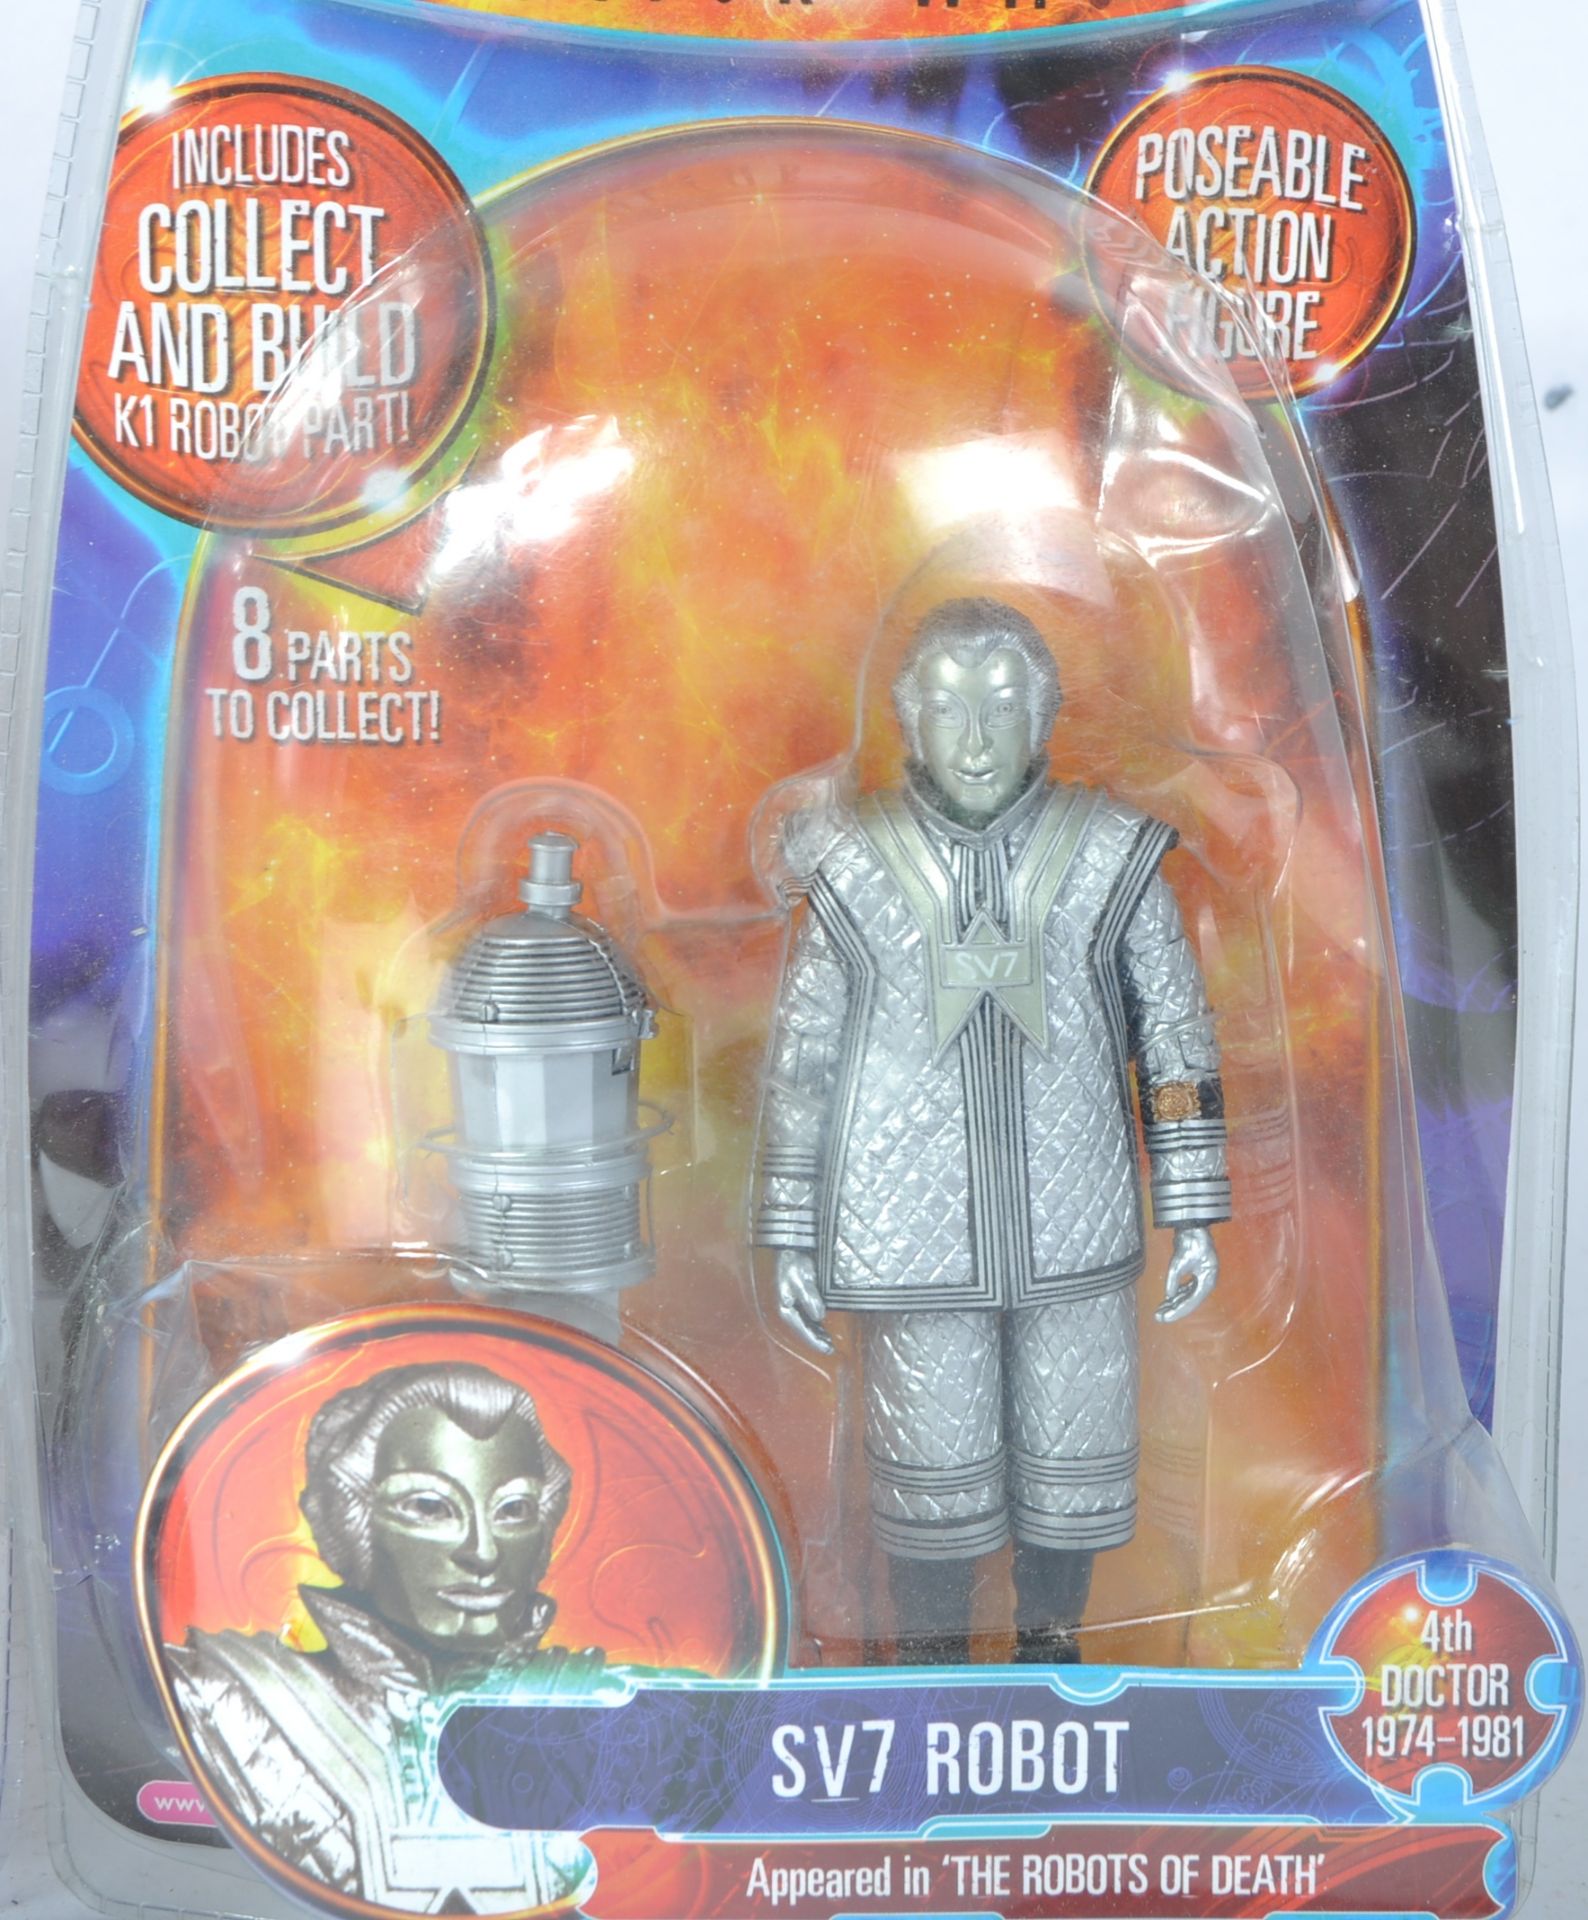 DOCTOR WHO - CHARACTER OPTIONS - 4TH DOCTOR RELATED ACTION FIGURES - Image 2 of 5